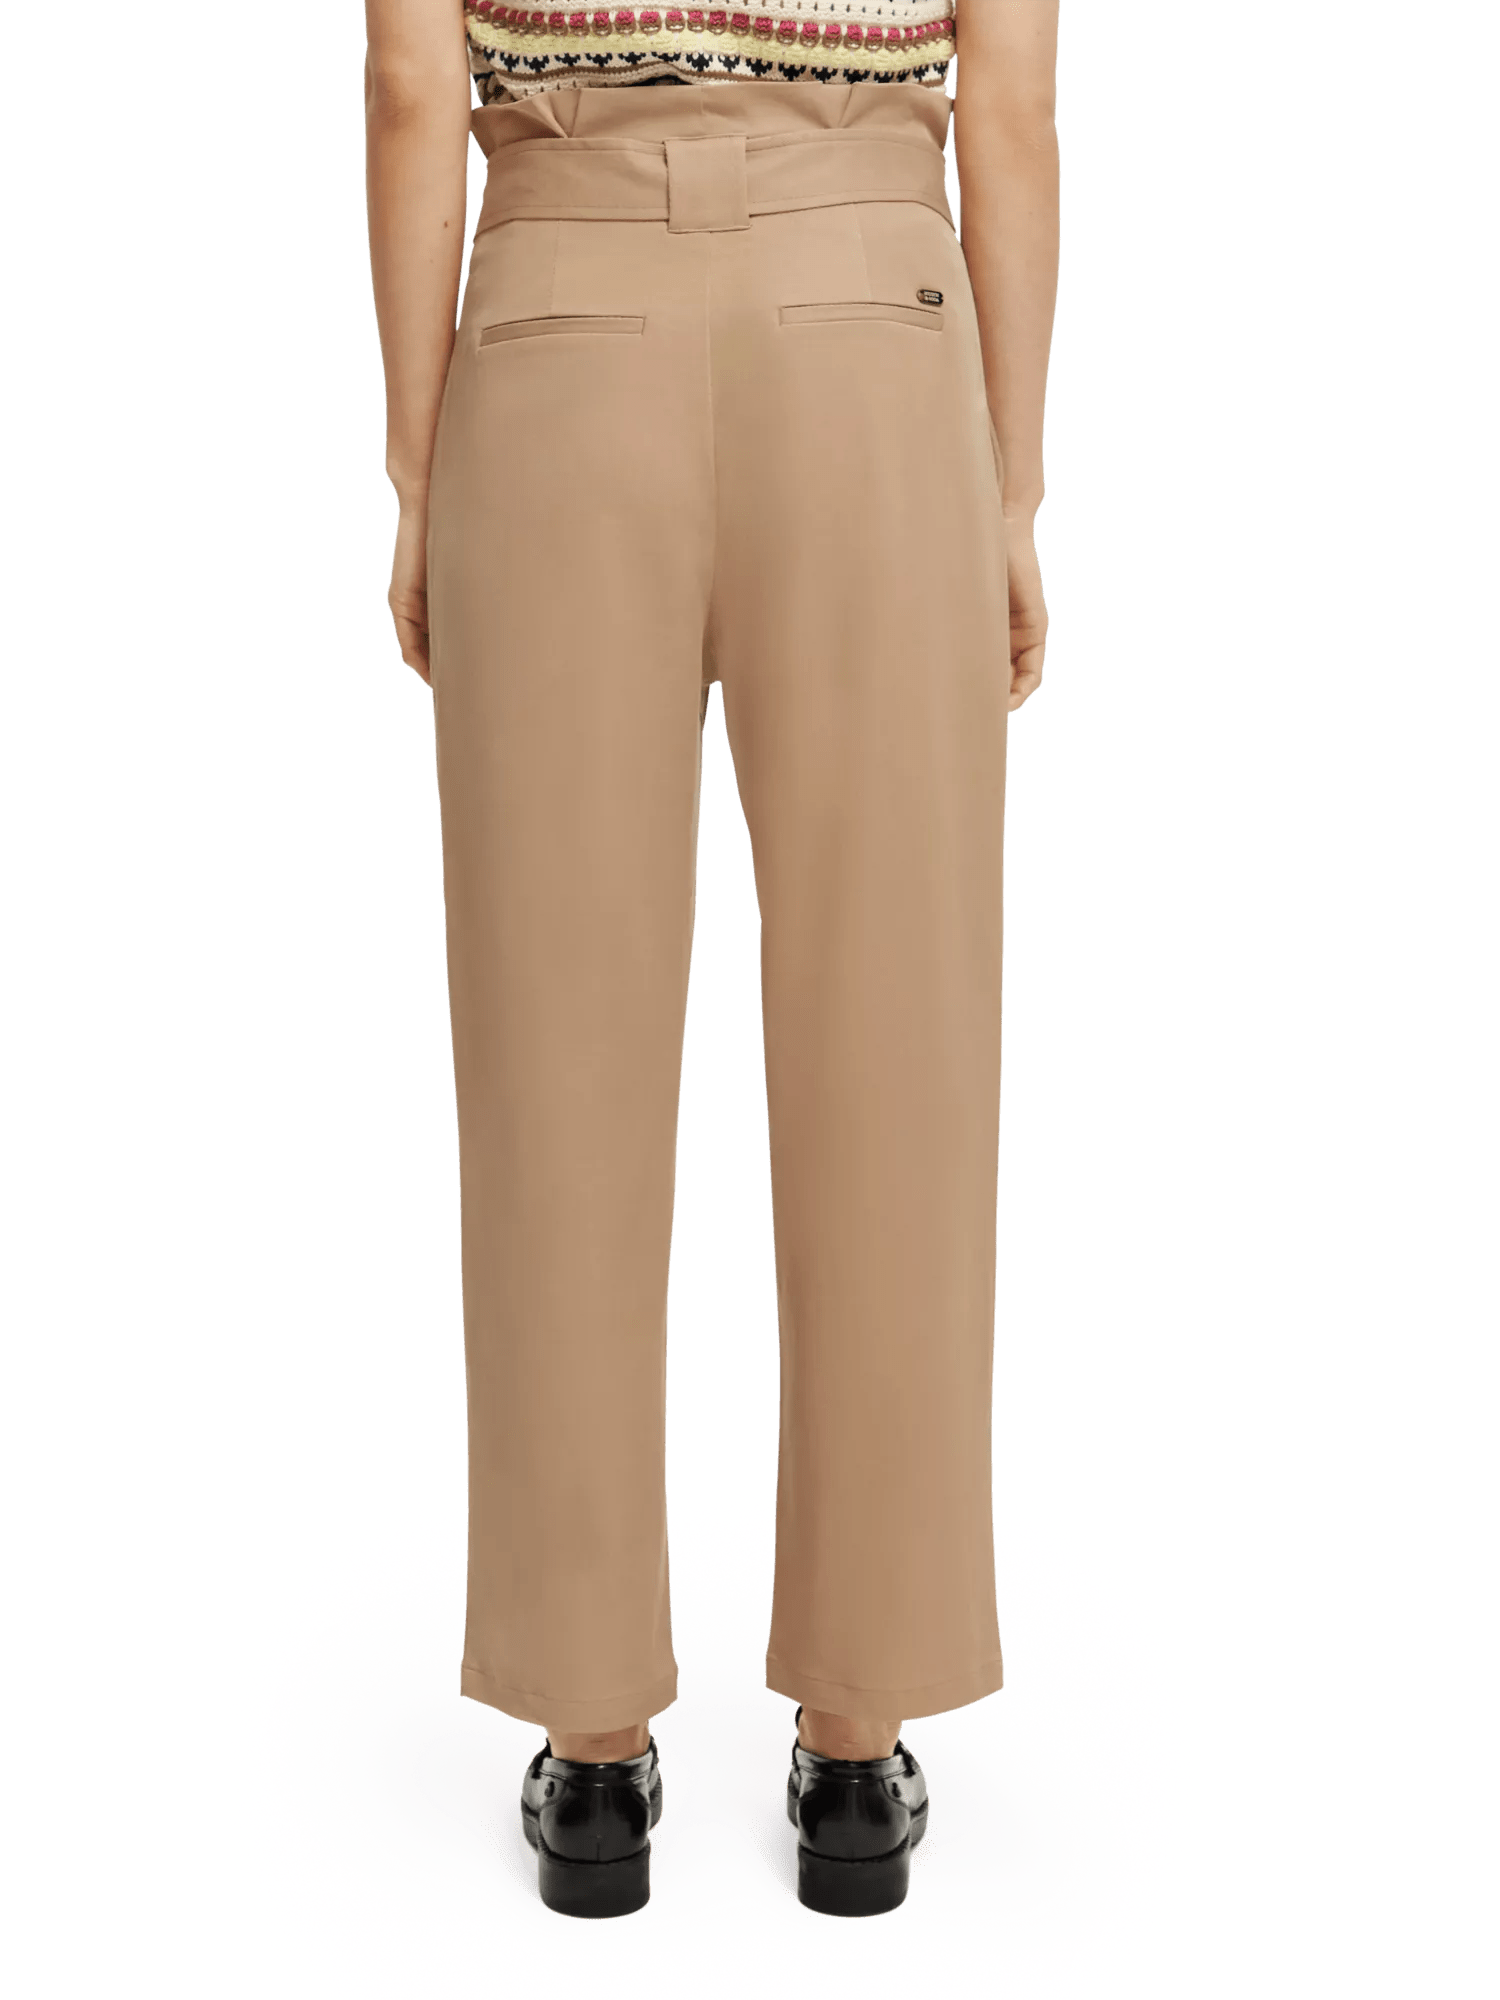 Scotch & Soda The Daisy high-rise paper bag trousers MDL-BCK